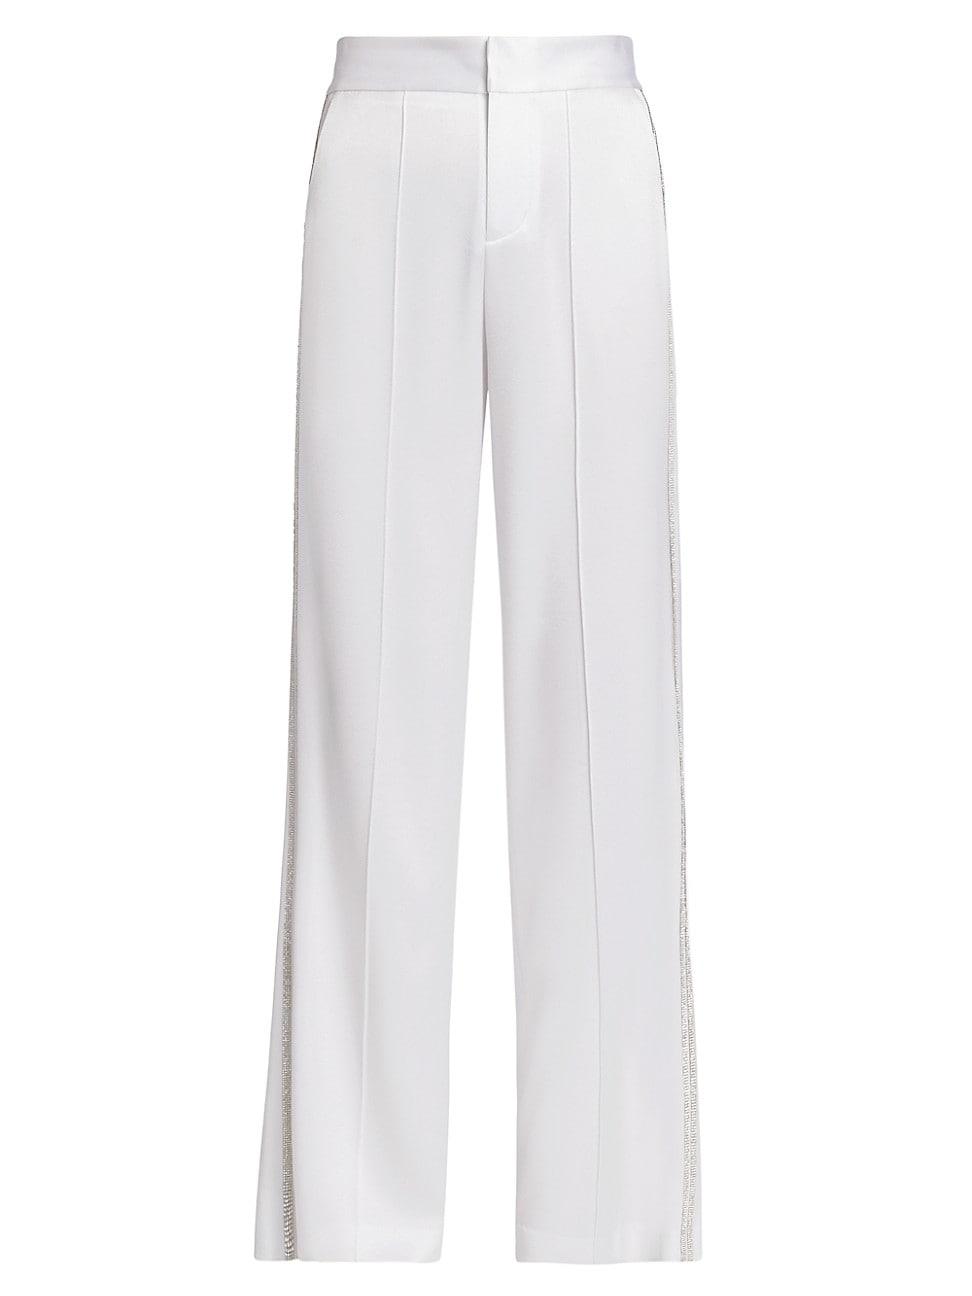 Alice + Olivia Dylan Embellished Pants in White | Lyst